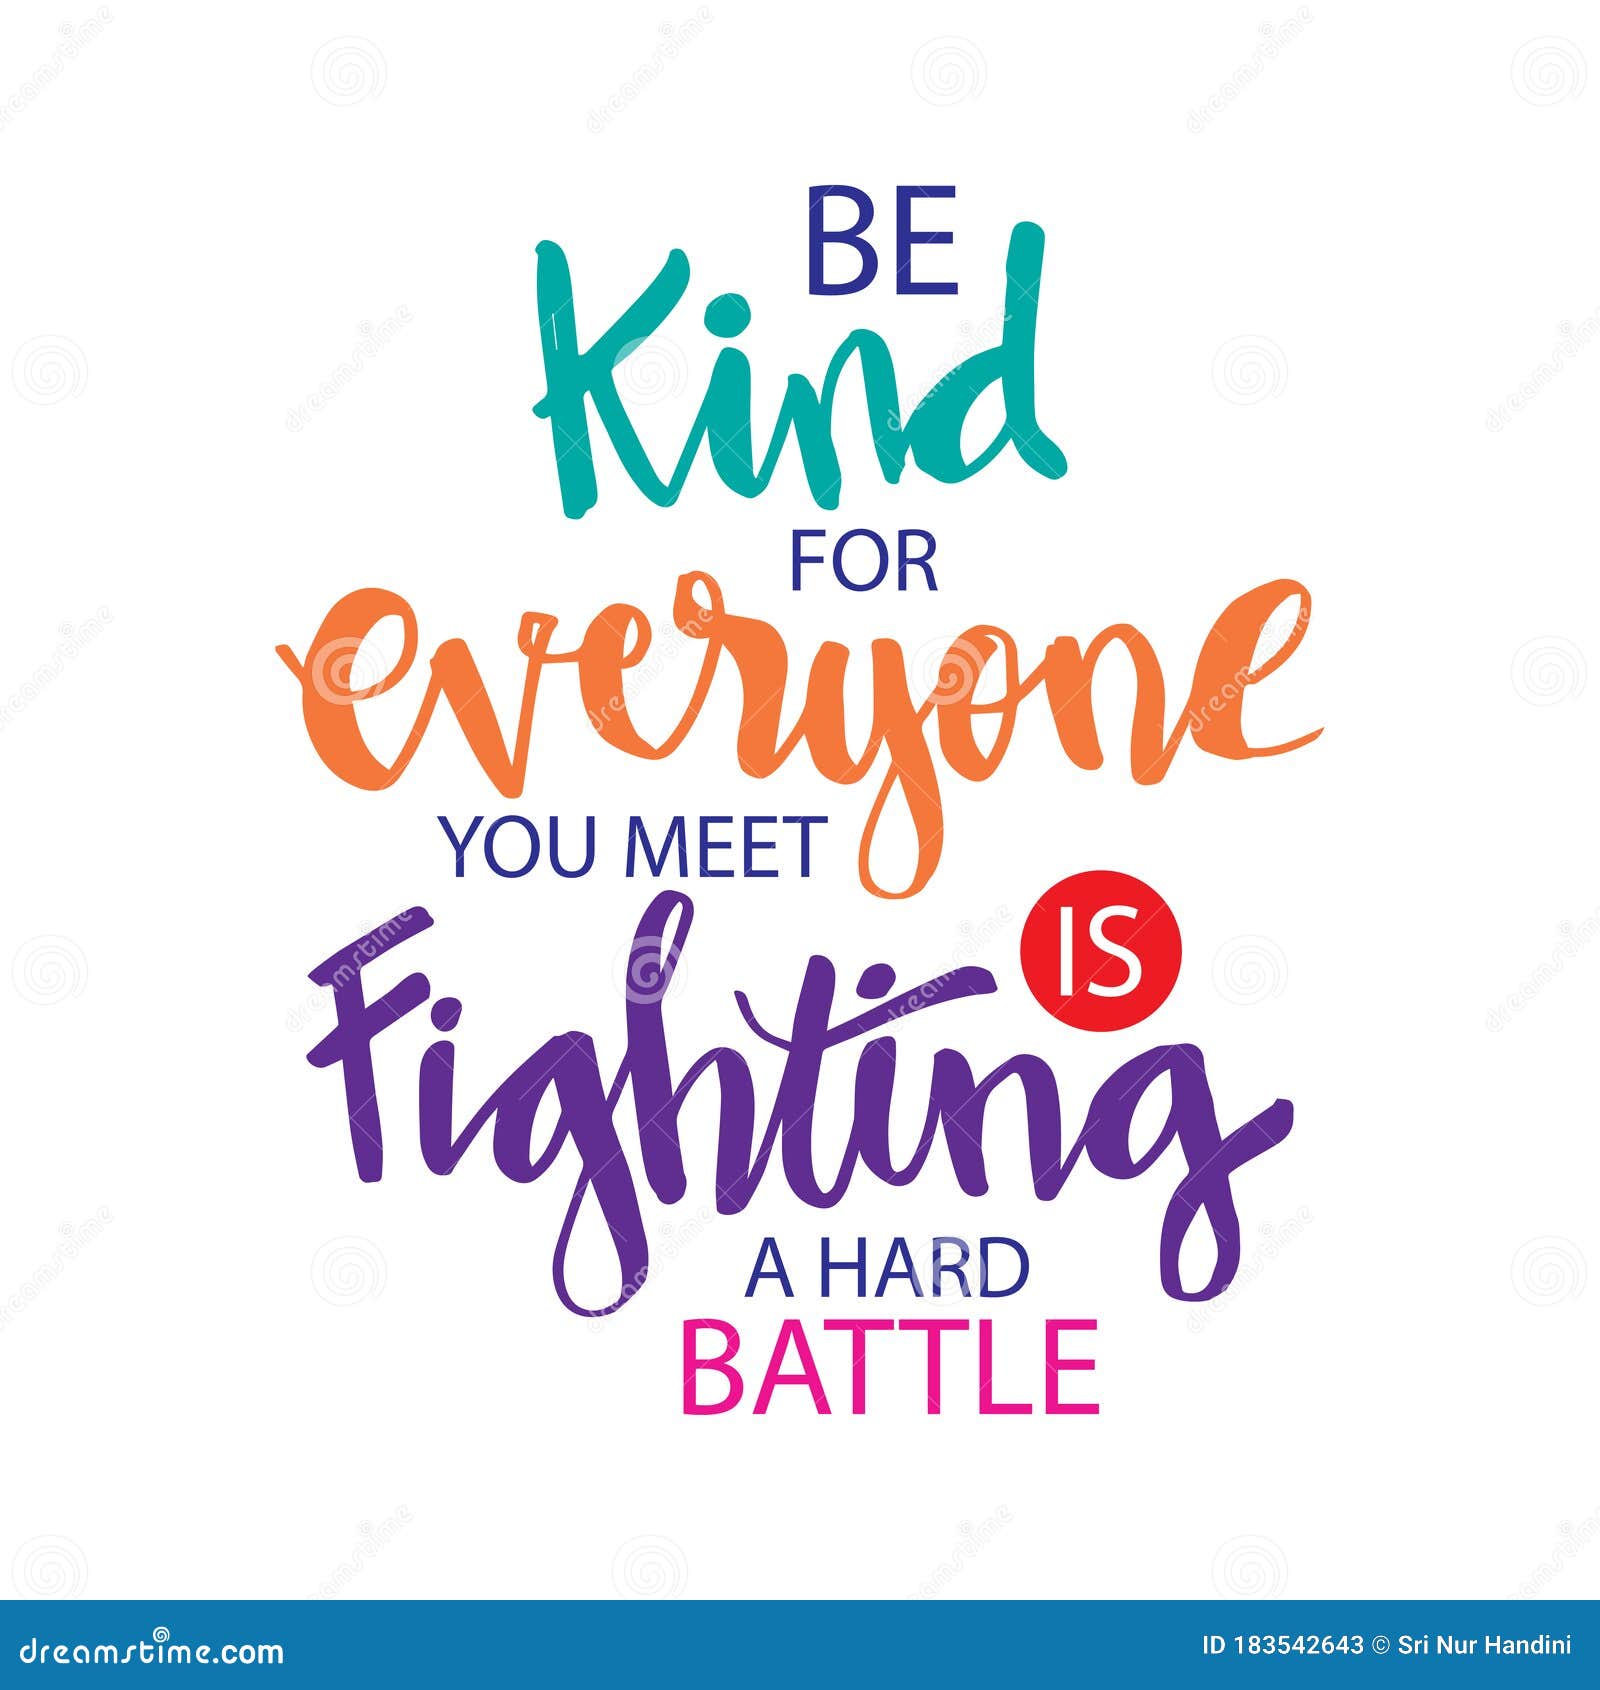 Be kind everyone you meet is fighting a hard battle digital download instant download Cut File Cricut Silhouette